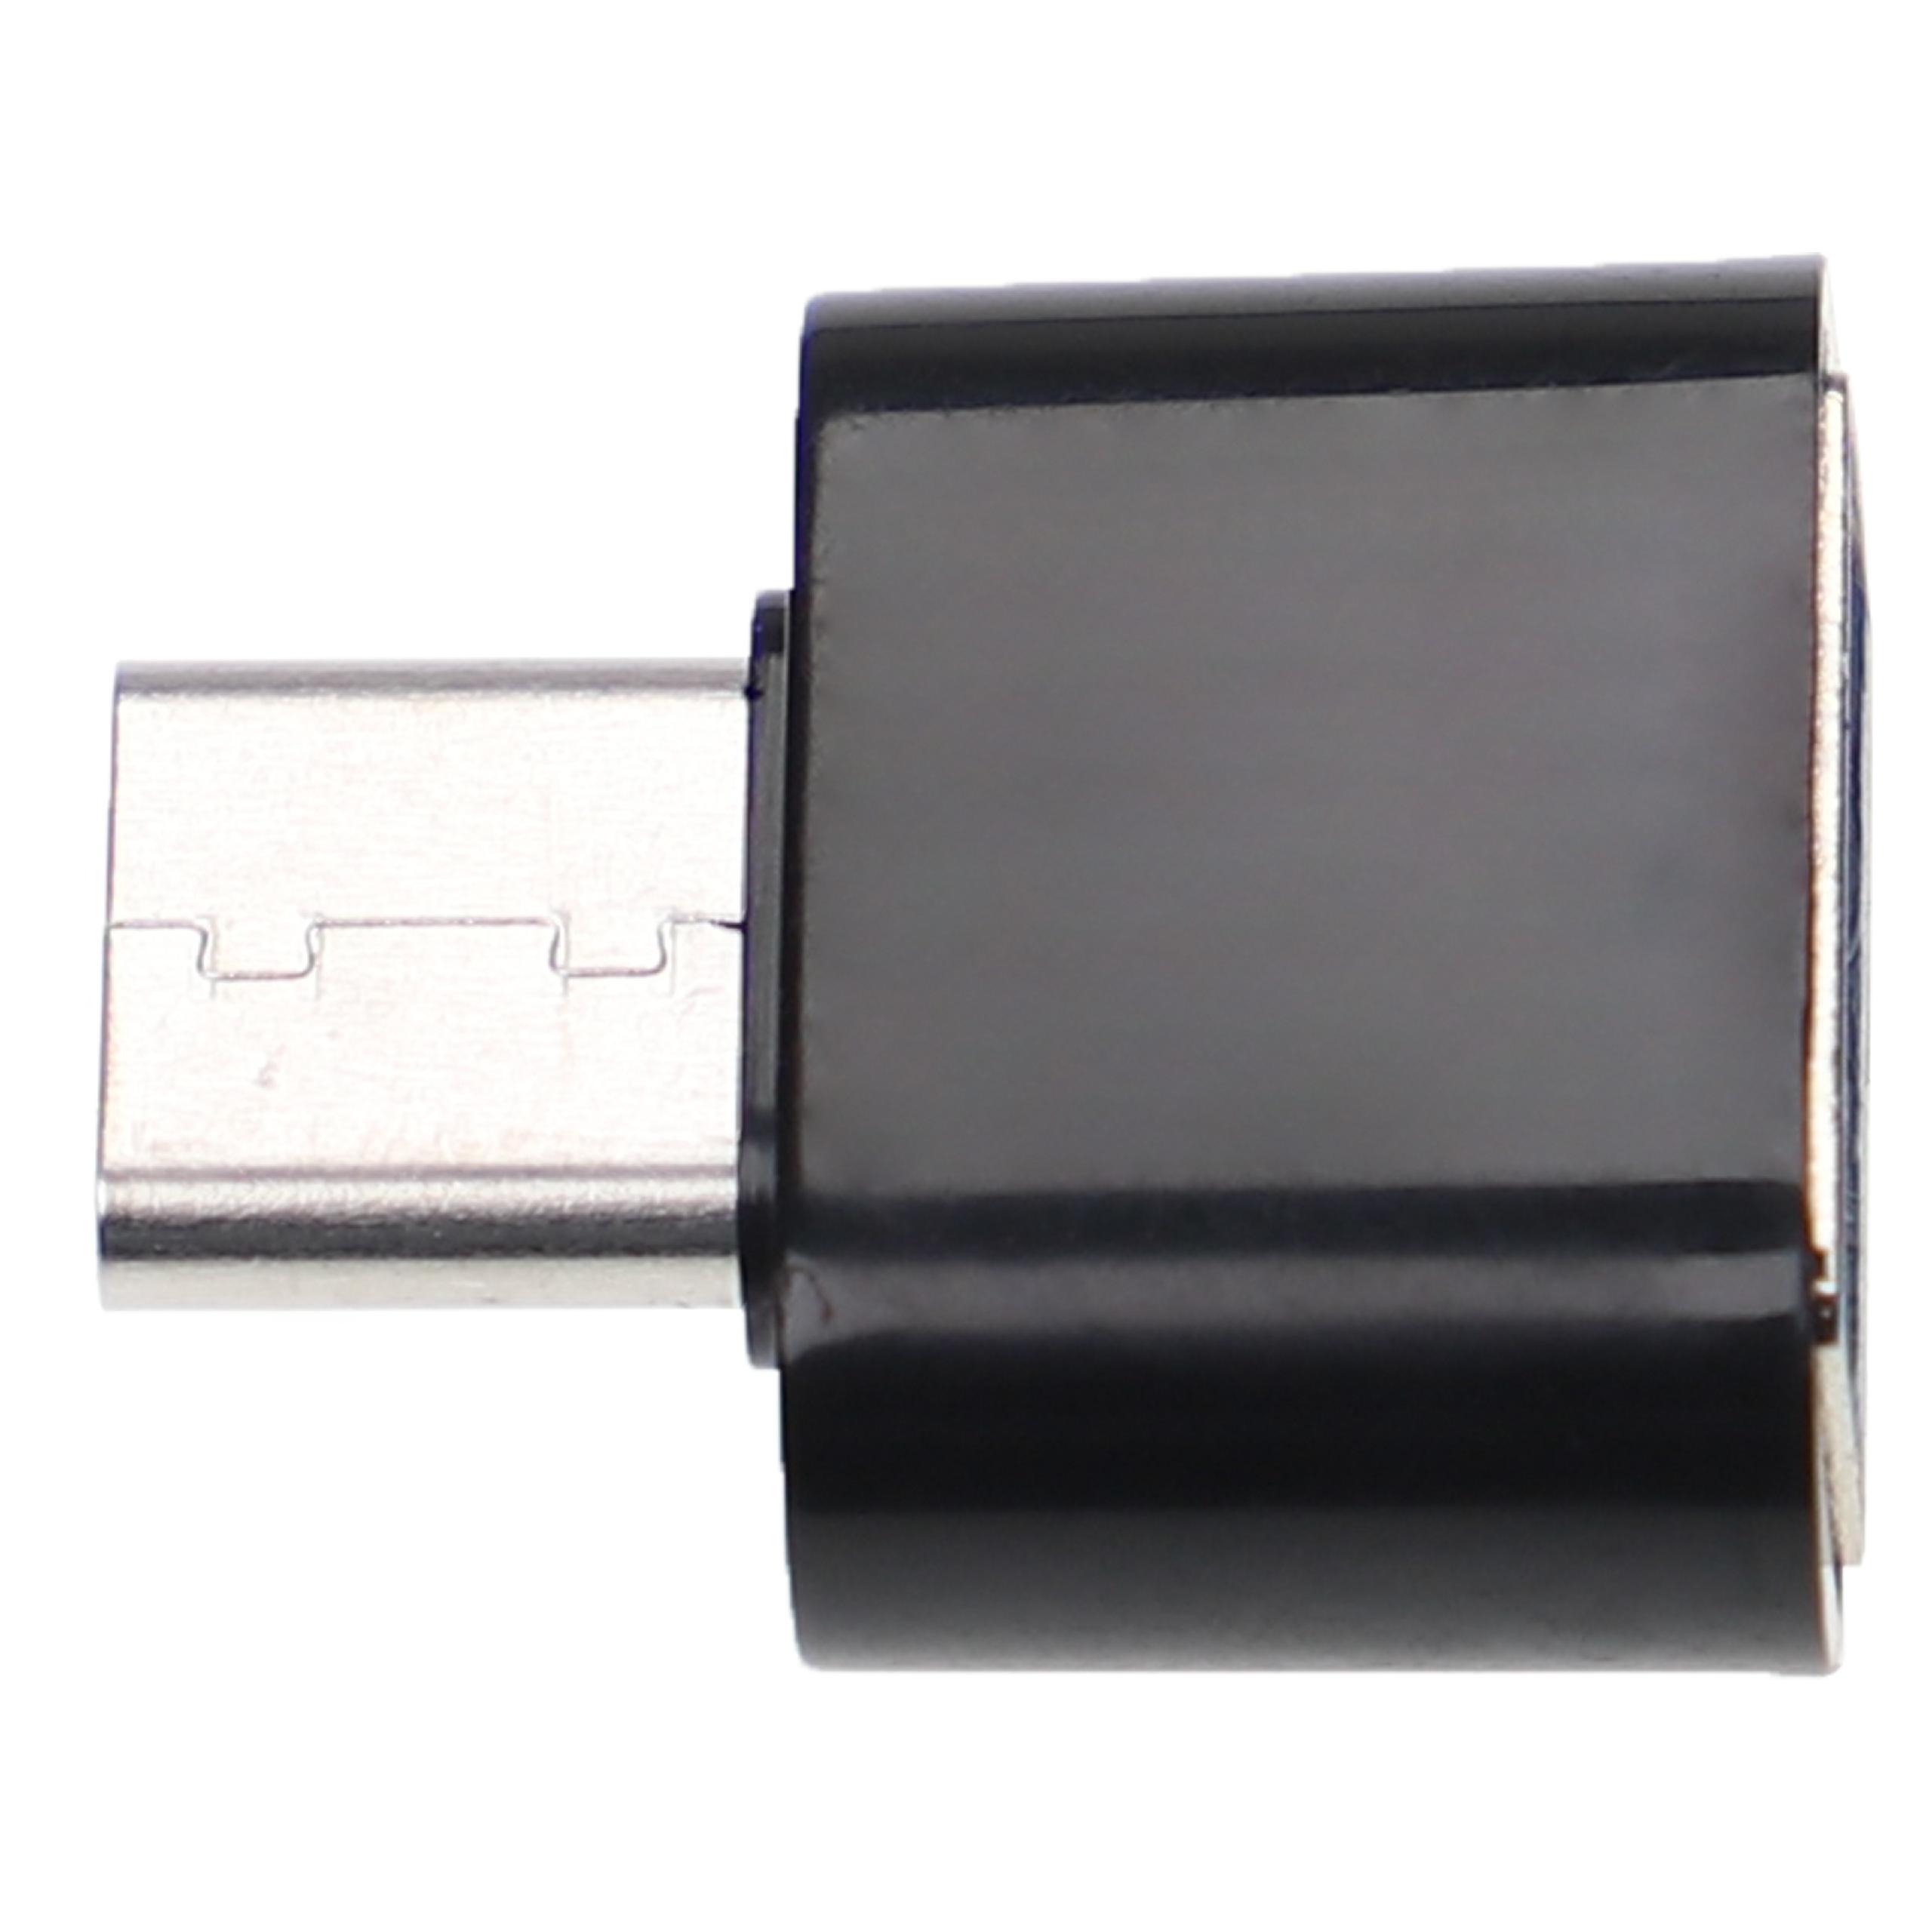 Adapter USB Type C (m) to USB 3.0 (f) suitable for Smartphone, Tablet, Notebook - USB Adapter Black